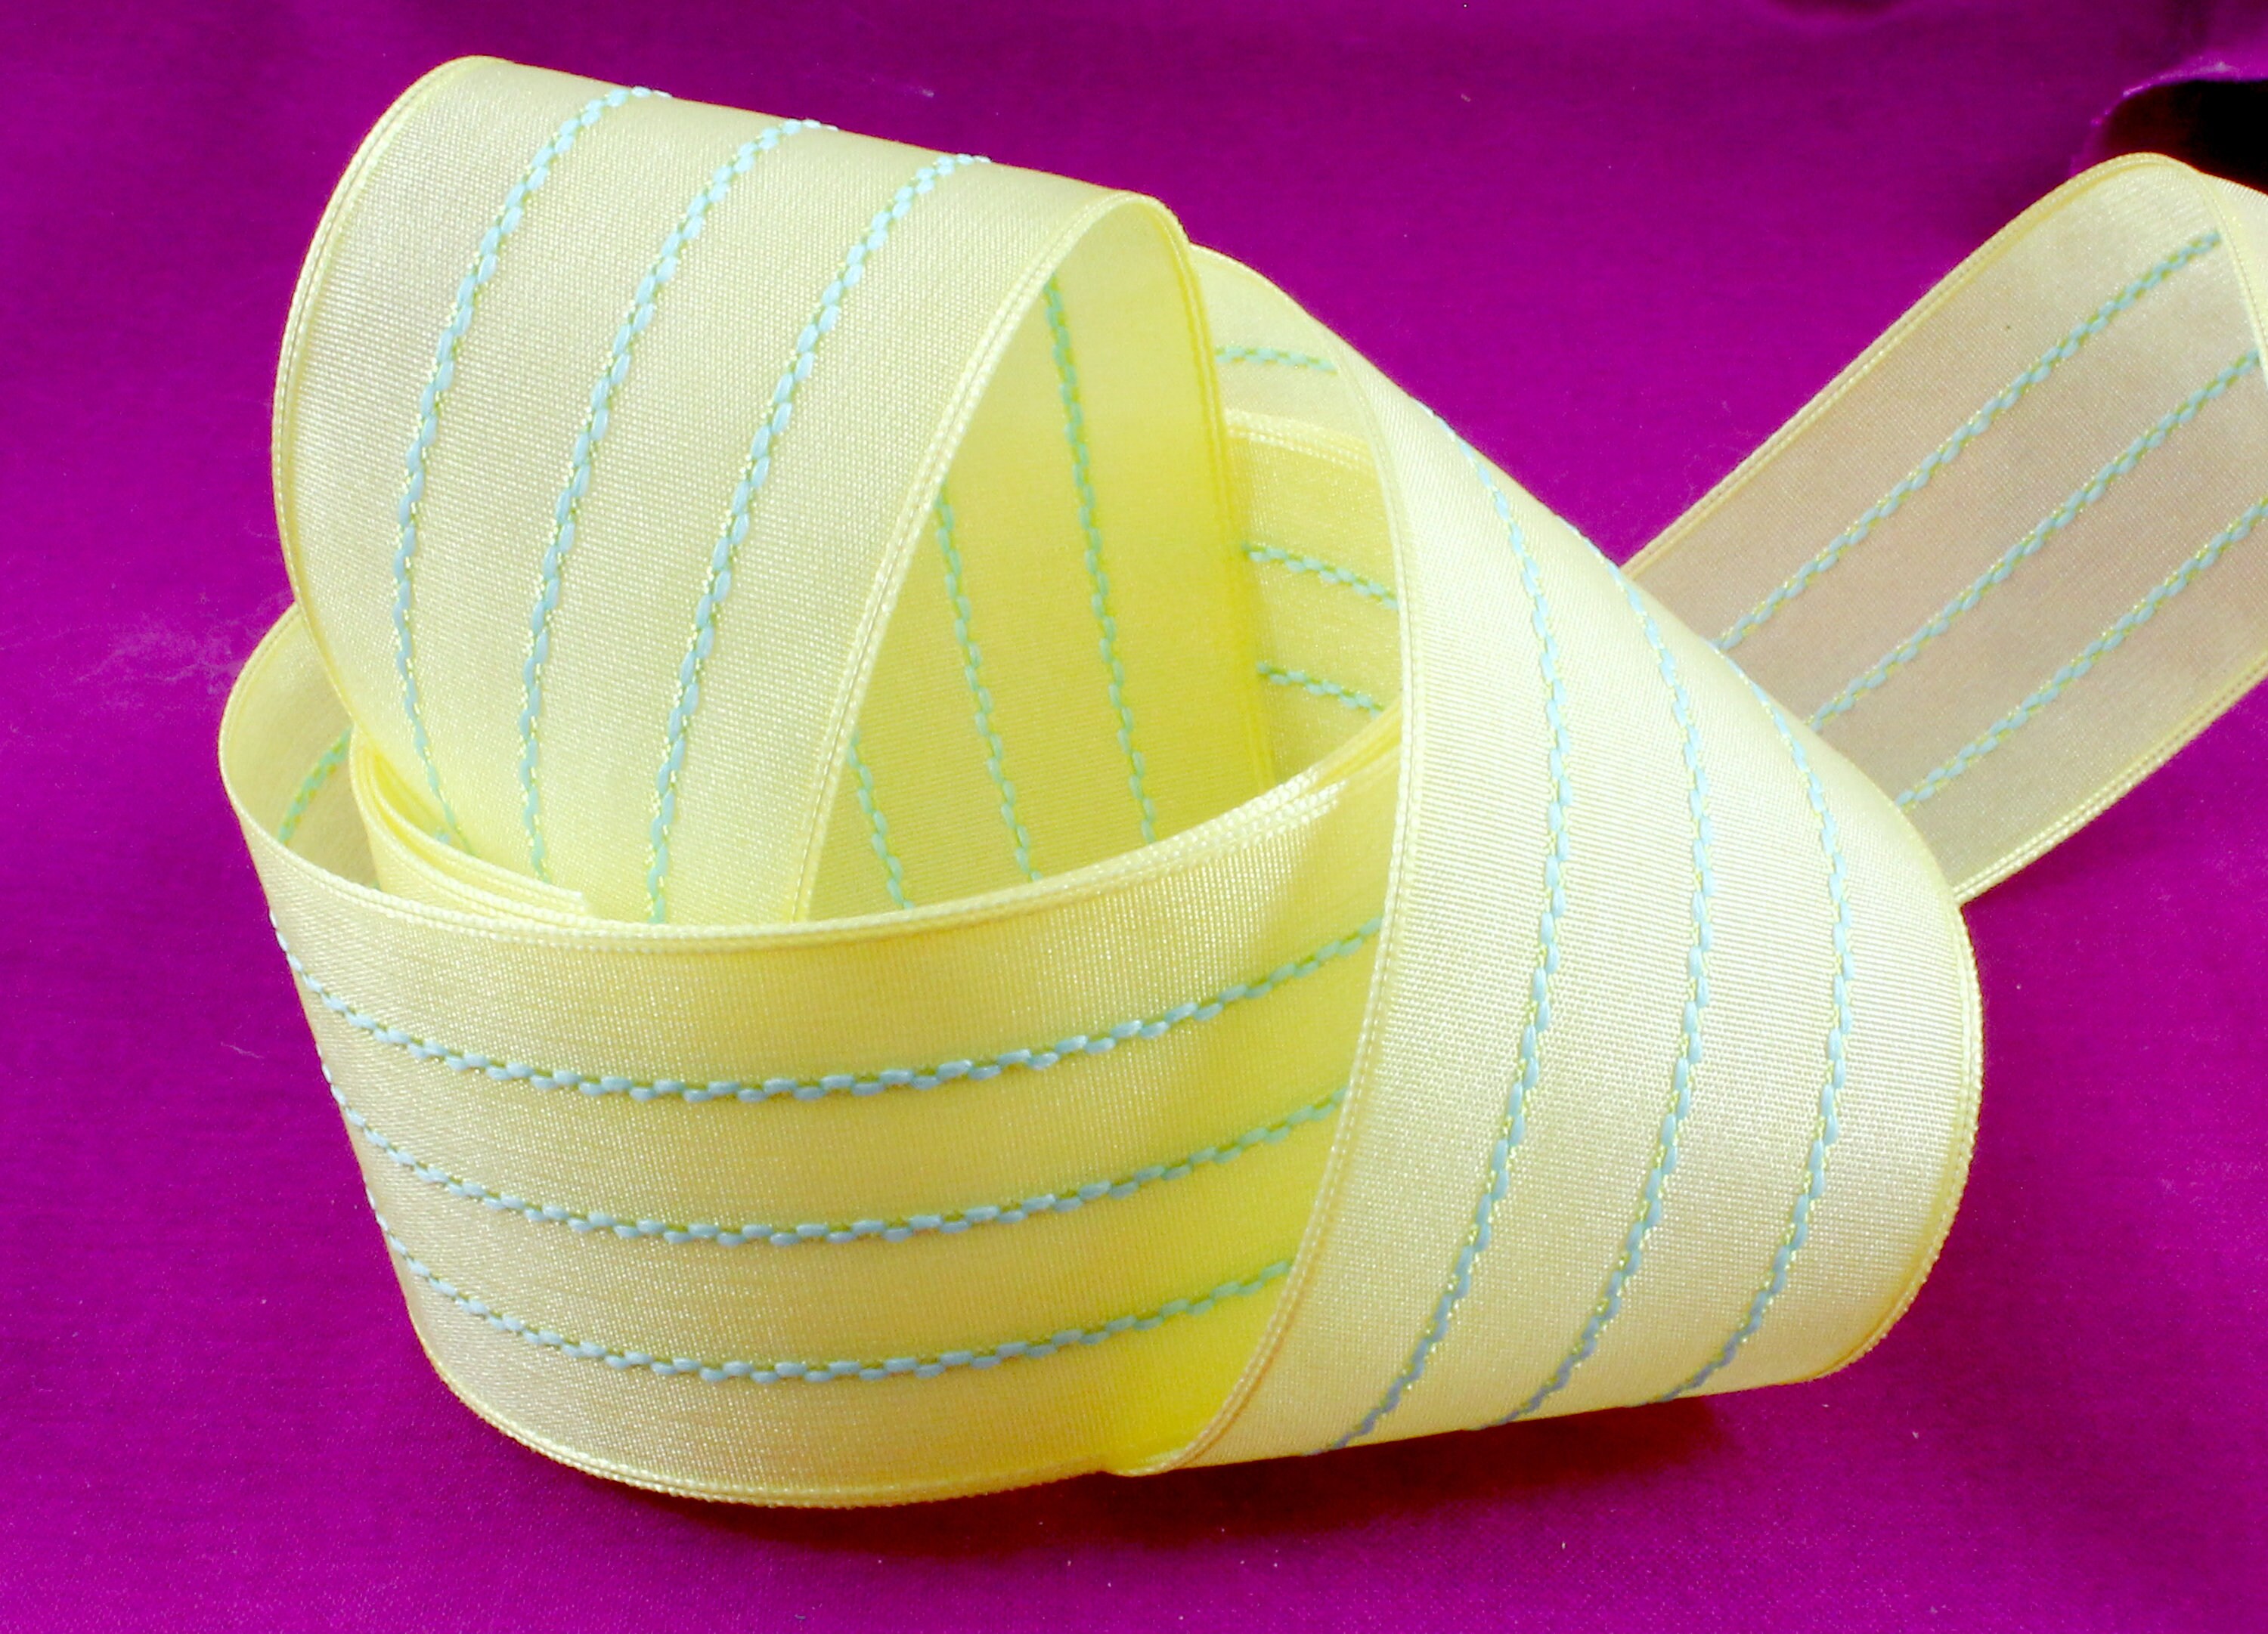 Thin Stictched Ribbon, Yellow, Solid Stitched Center Ribbon, Cotton Stitch  Ribbon in Canary Yellow, Crafts and Gift Wrapping Supply, 5 Yards 